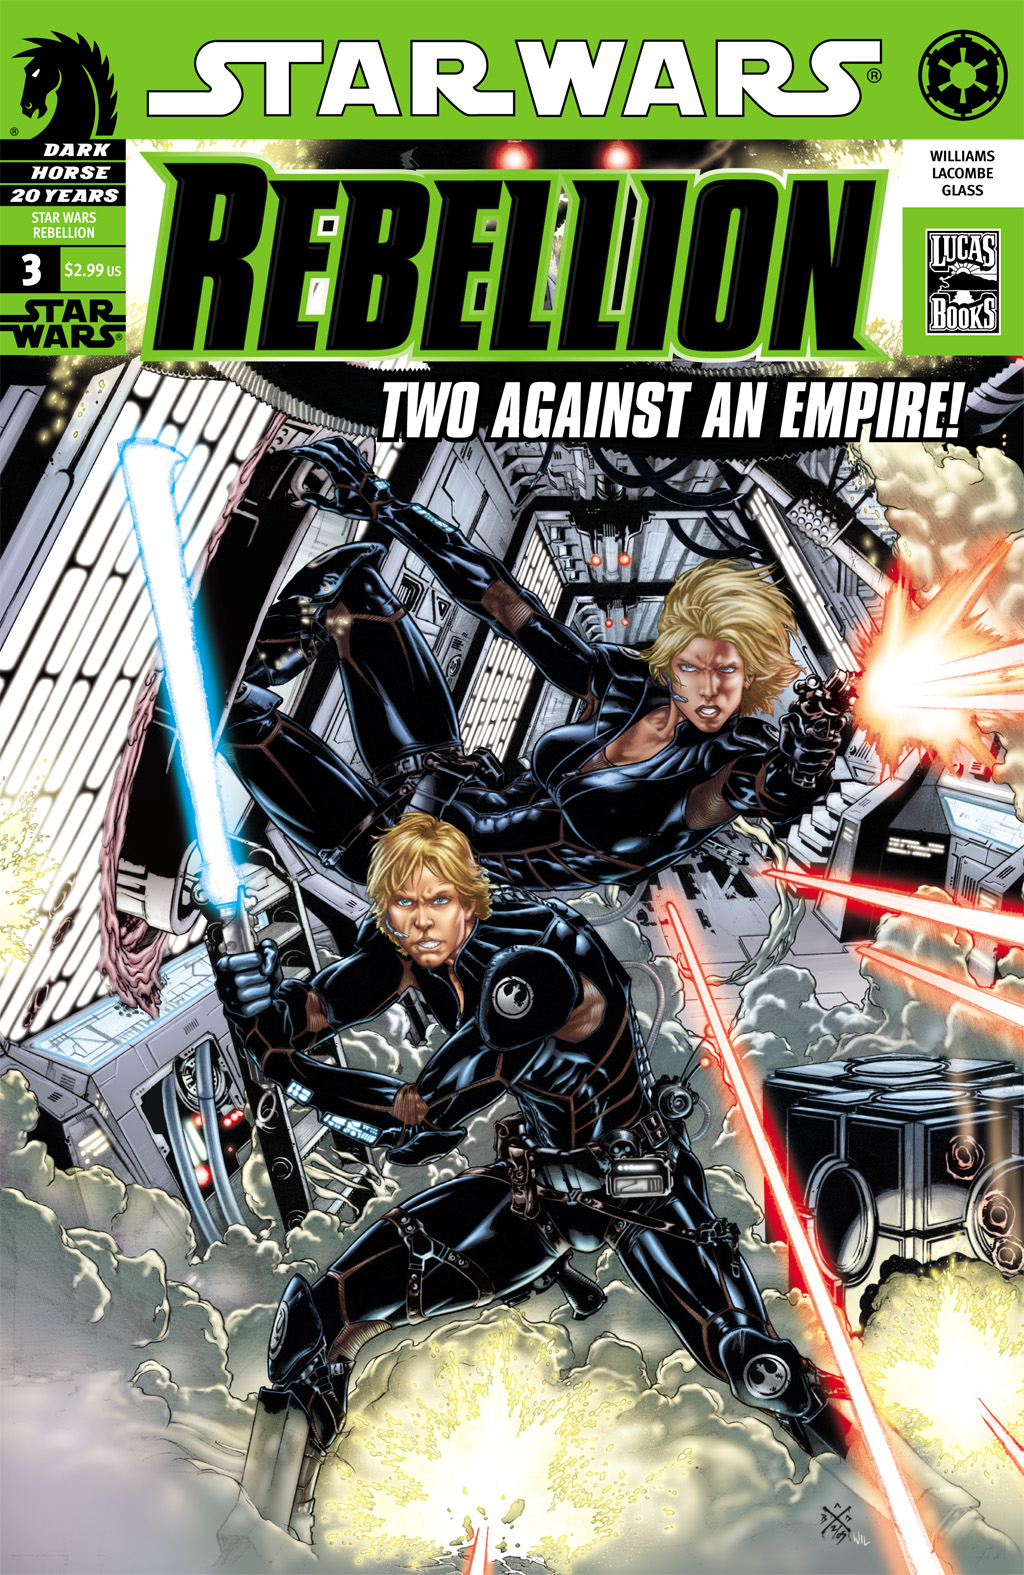 https://static.wikia.nocookie.net/starwars/images/8/8a/Rebellion3cover.jpg/revision/latest?cb=20150615040919